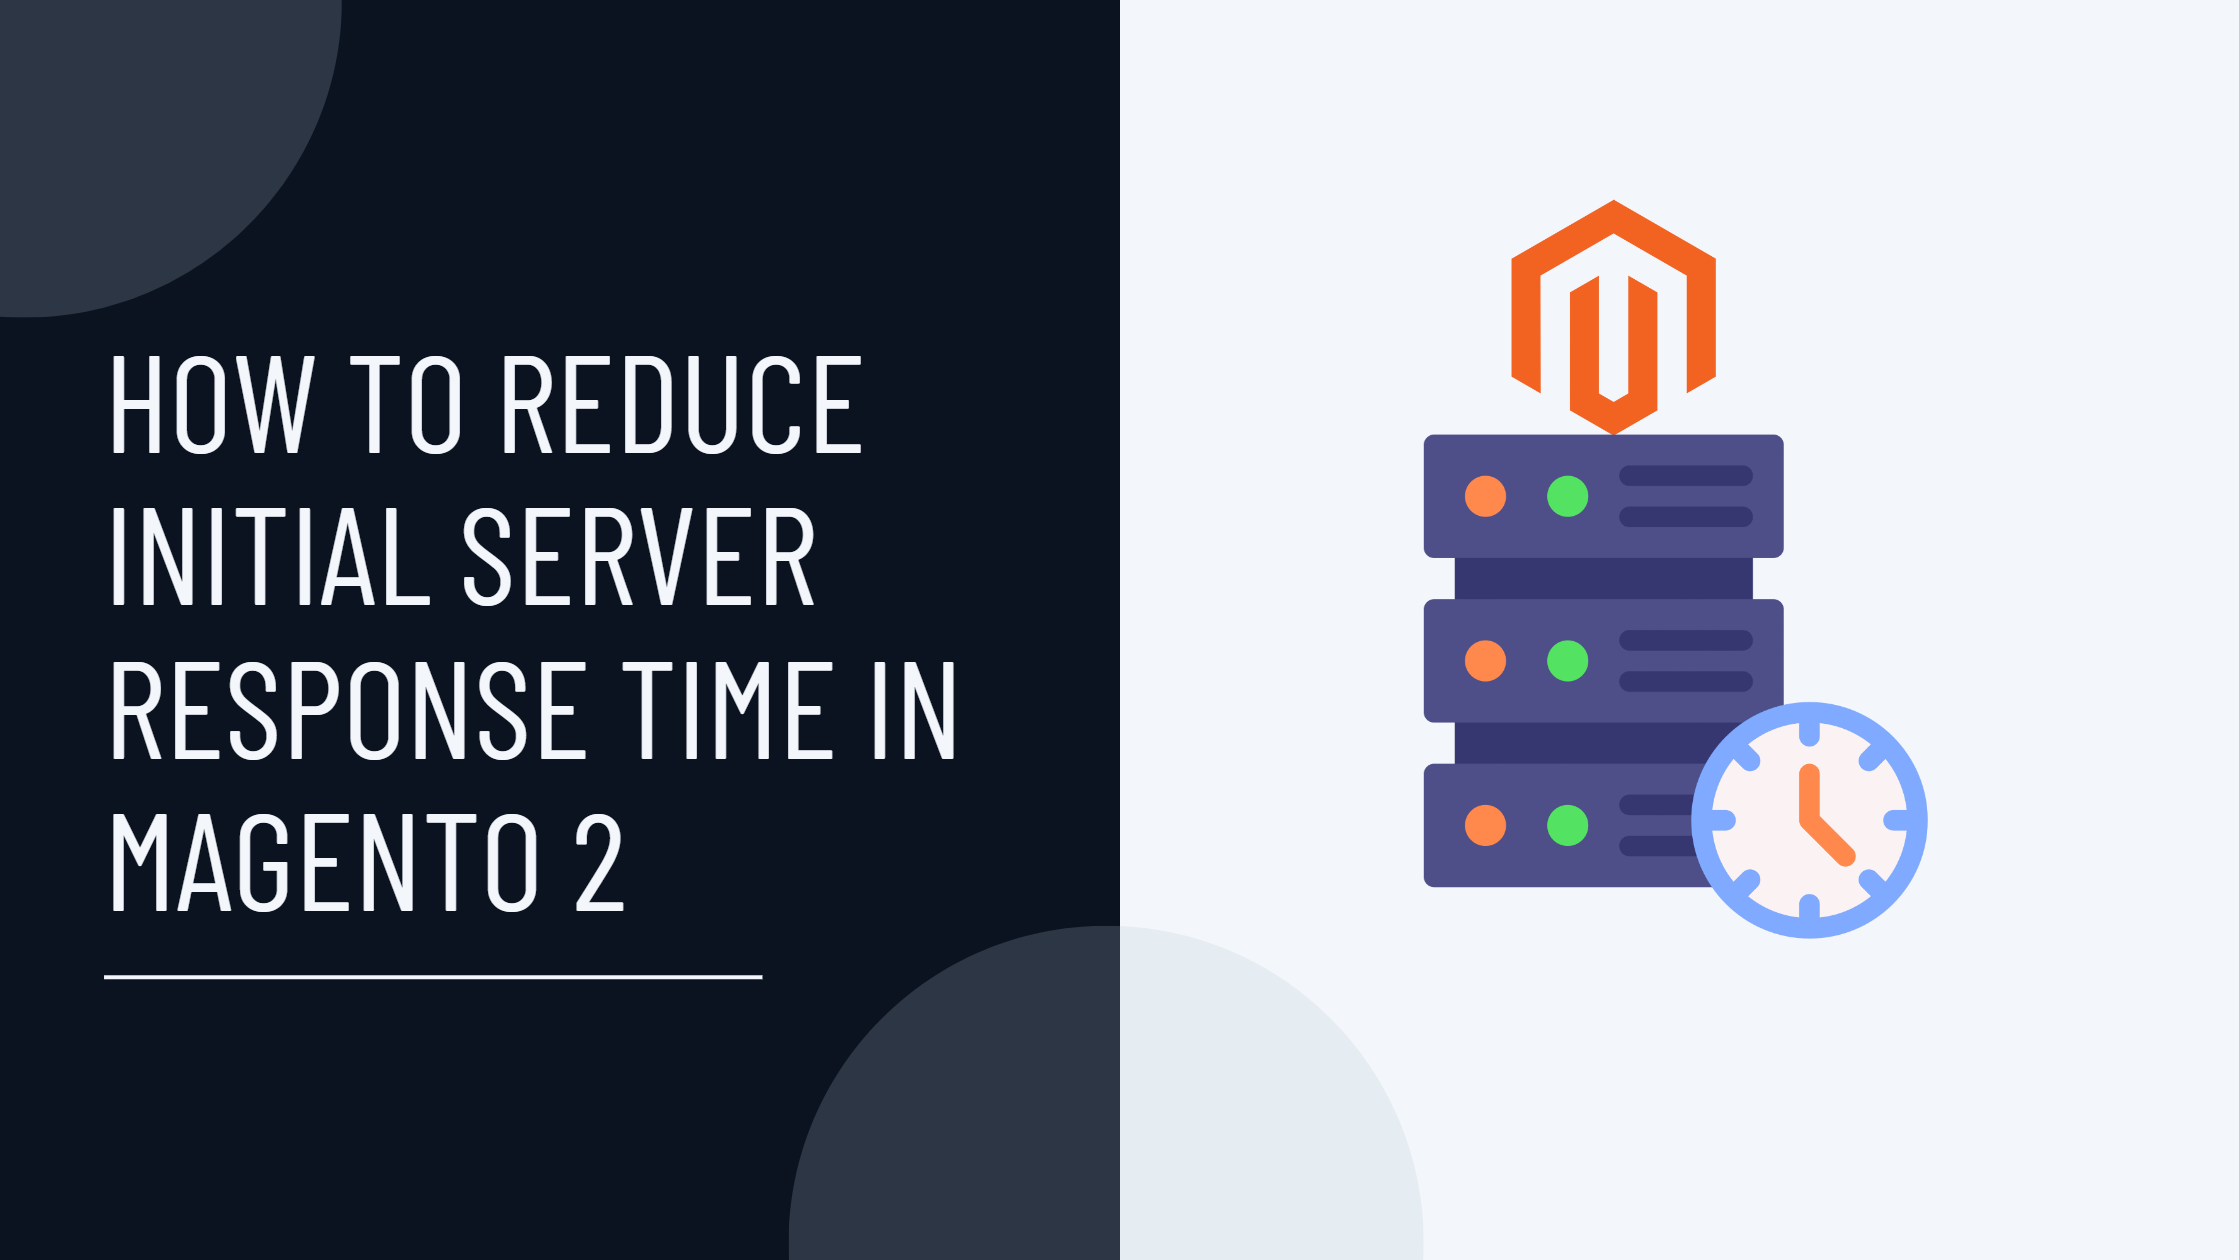 How to Reduce Initial Server Response Time in Magento 2